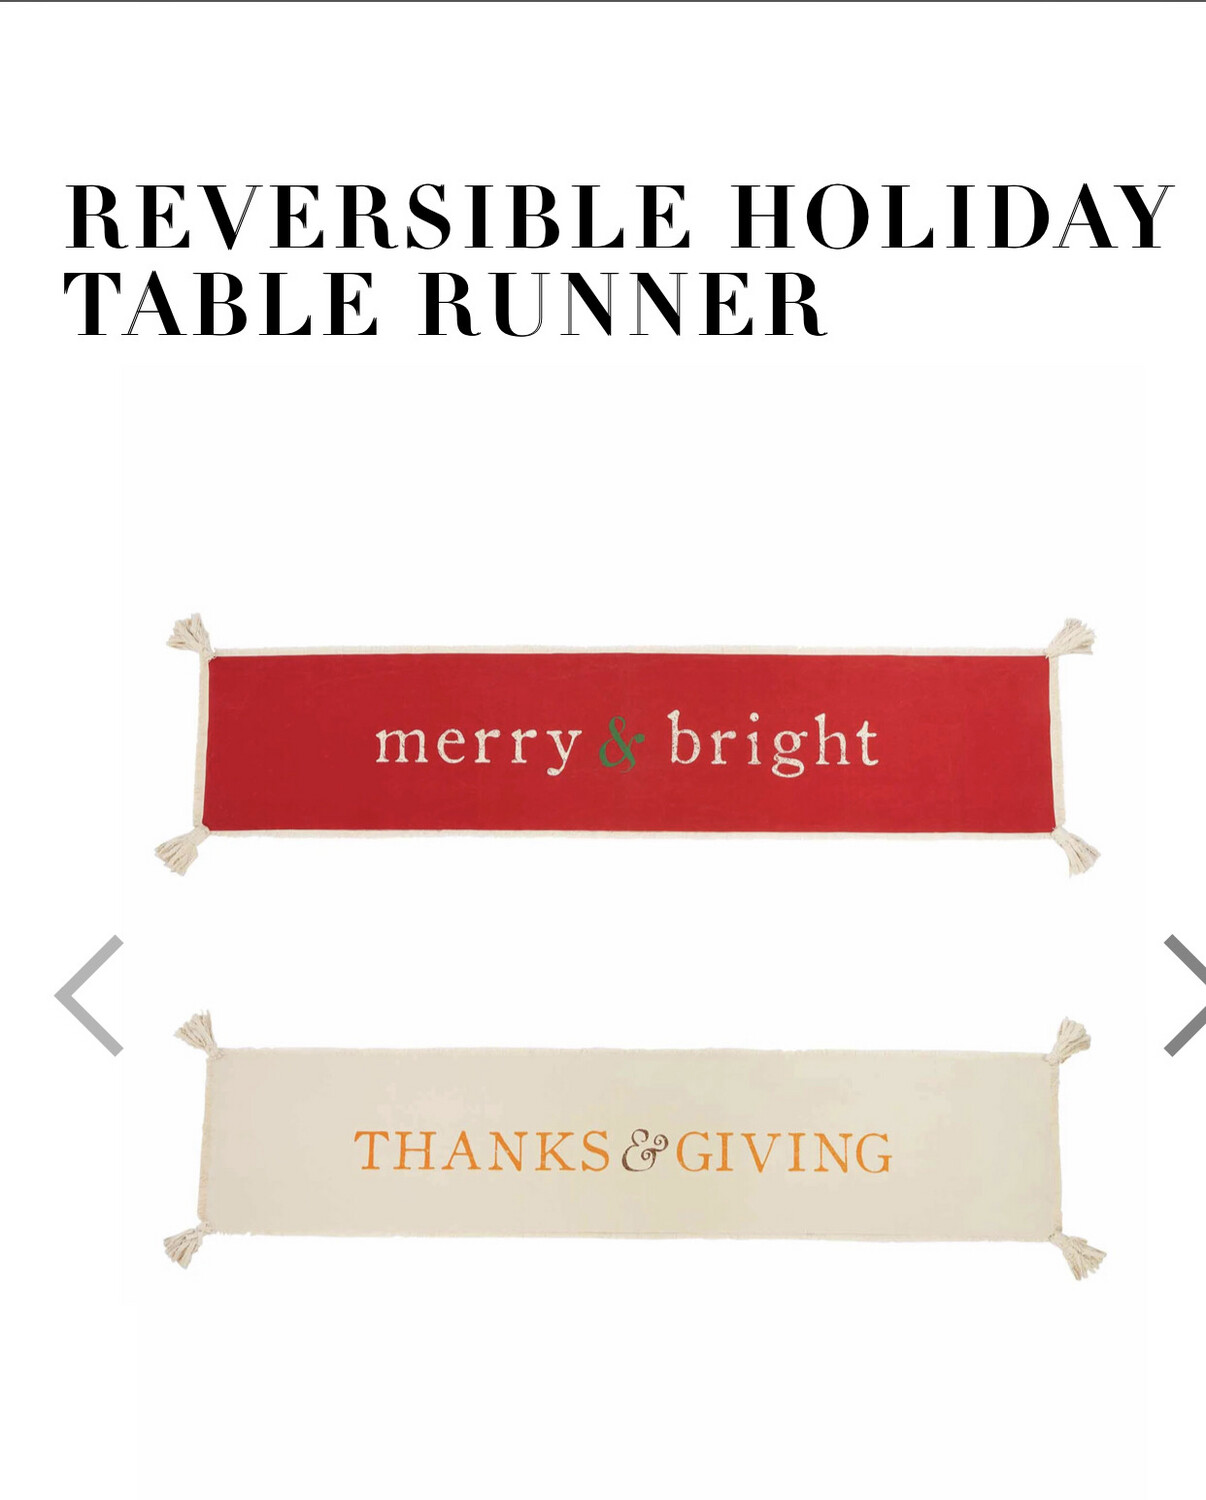 Give Thanks/ Merry & Bright Table Runner